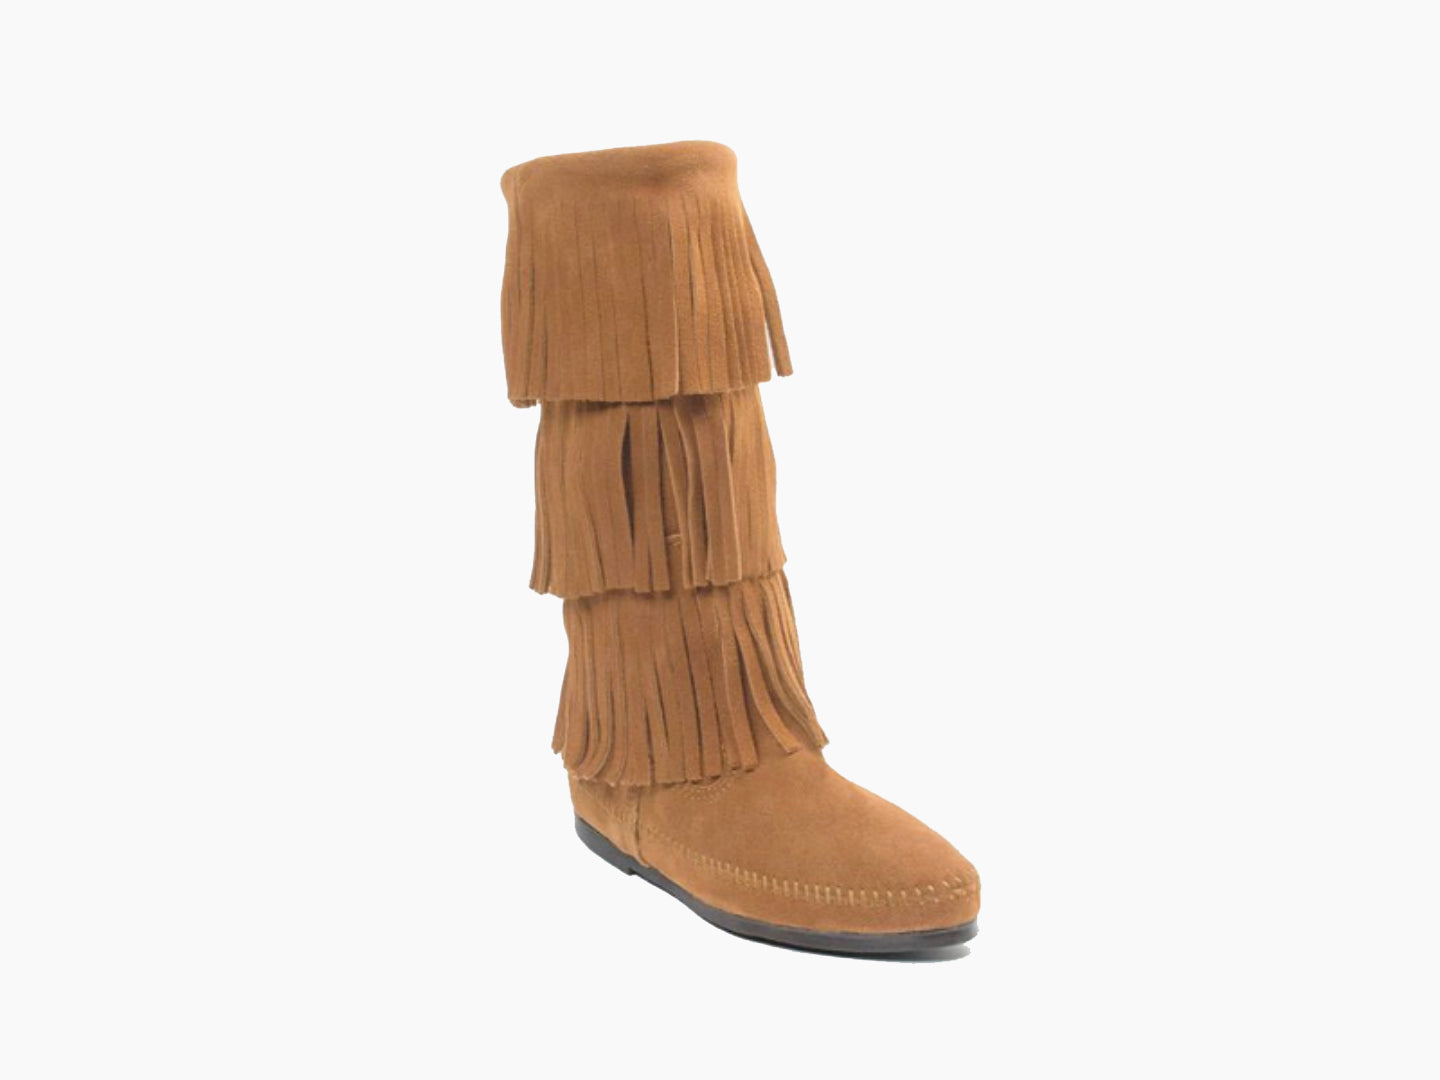 3-Layer Fringe Boot in Taupe from 3/4 Angle View